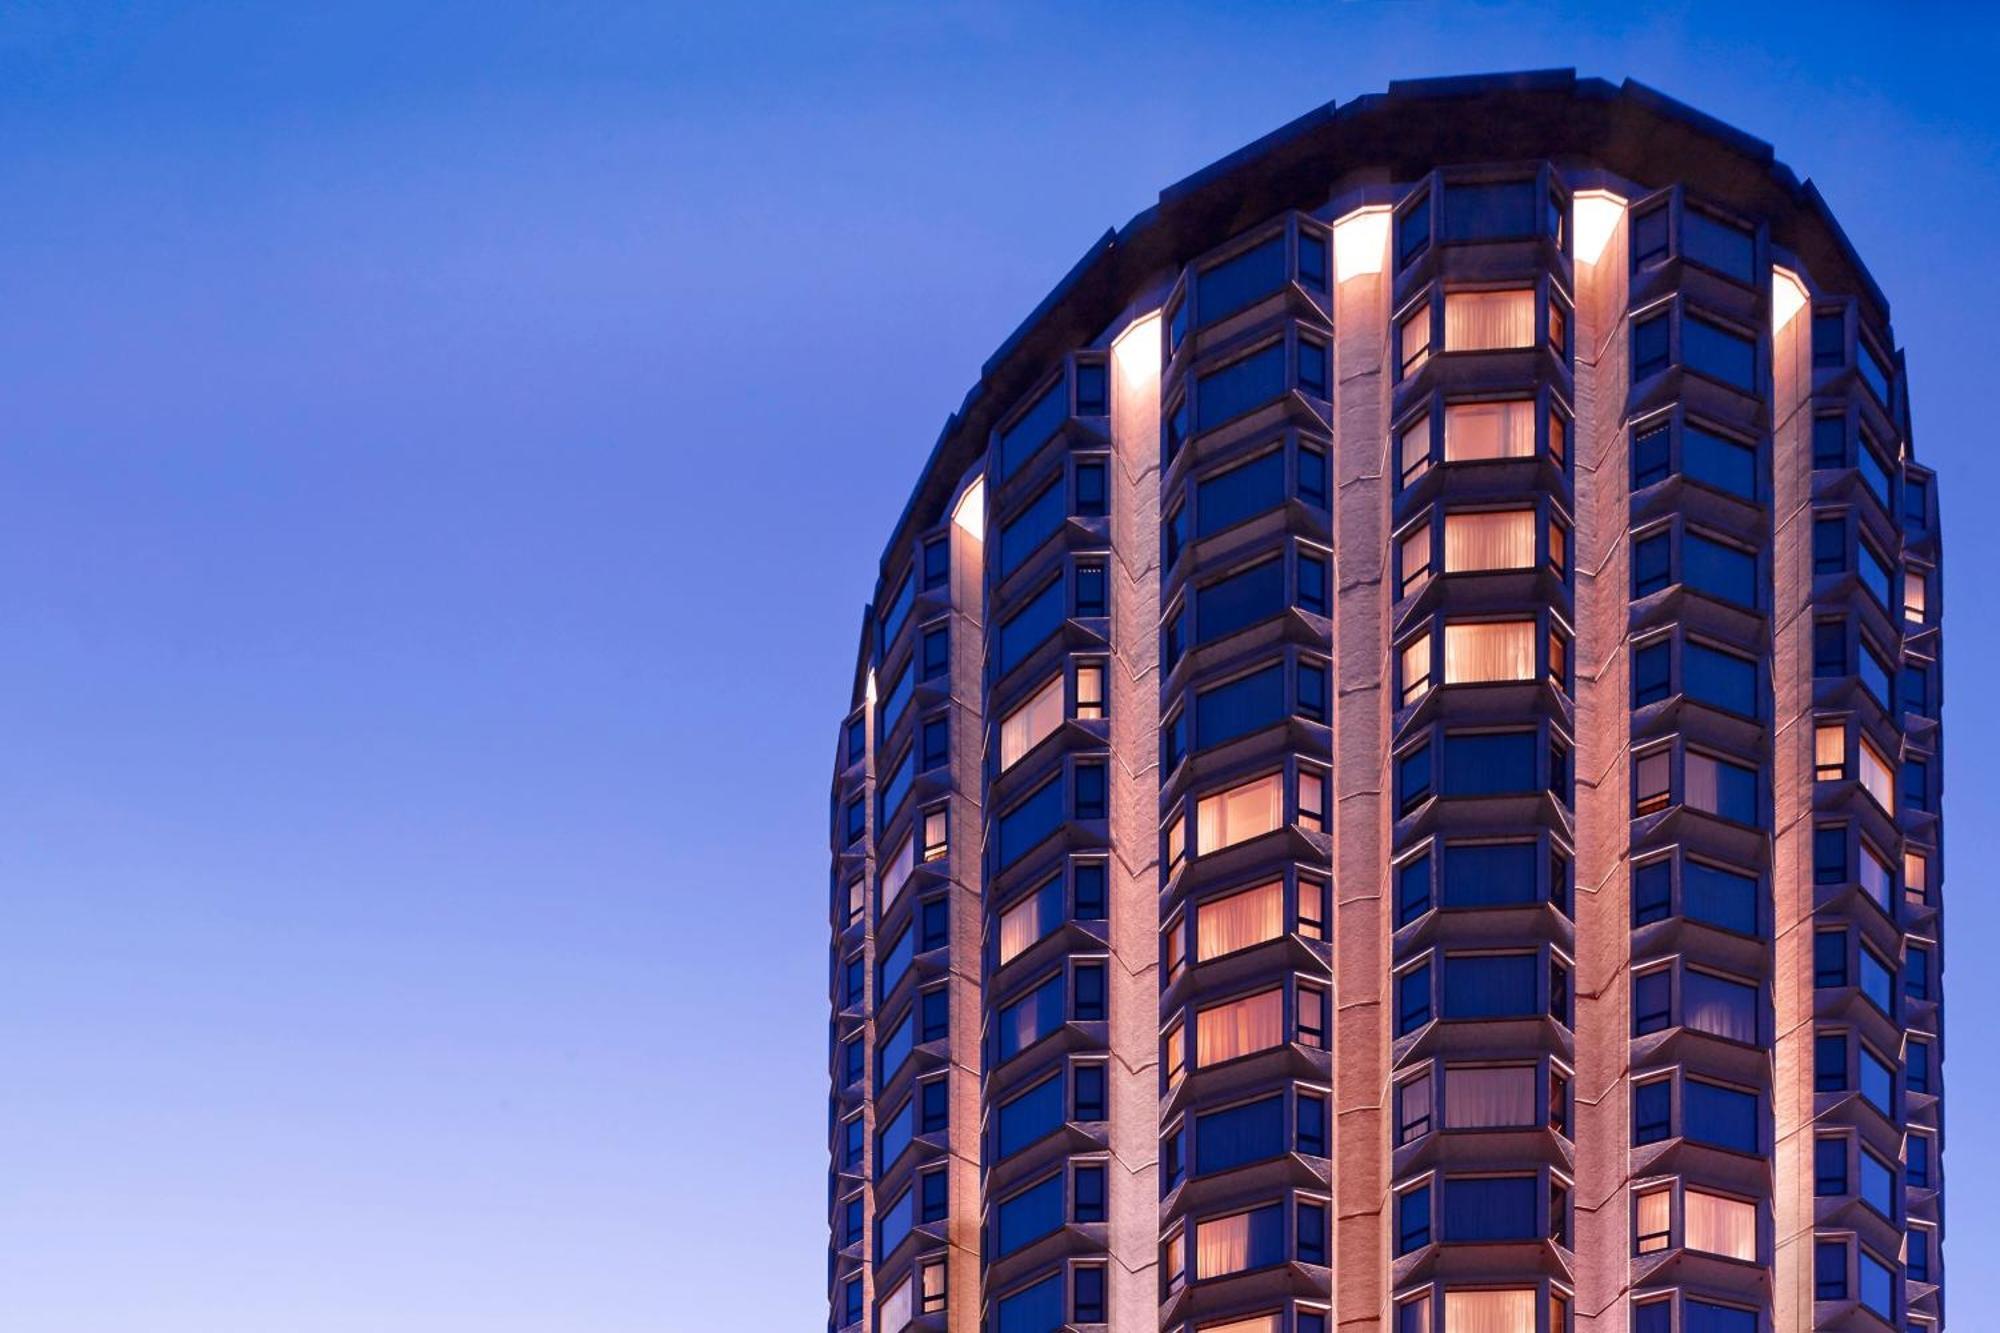 The Park Tower Knightsbridge, A Luxury Collection Hotel, London Exterior foto